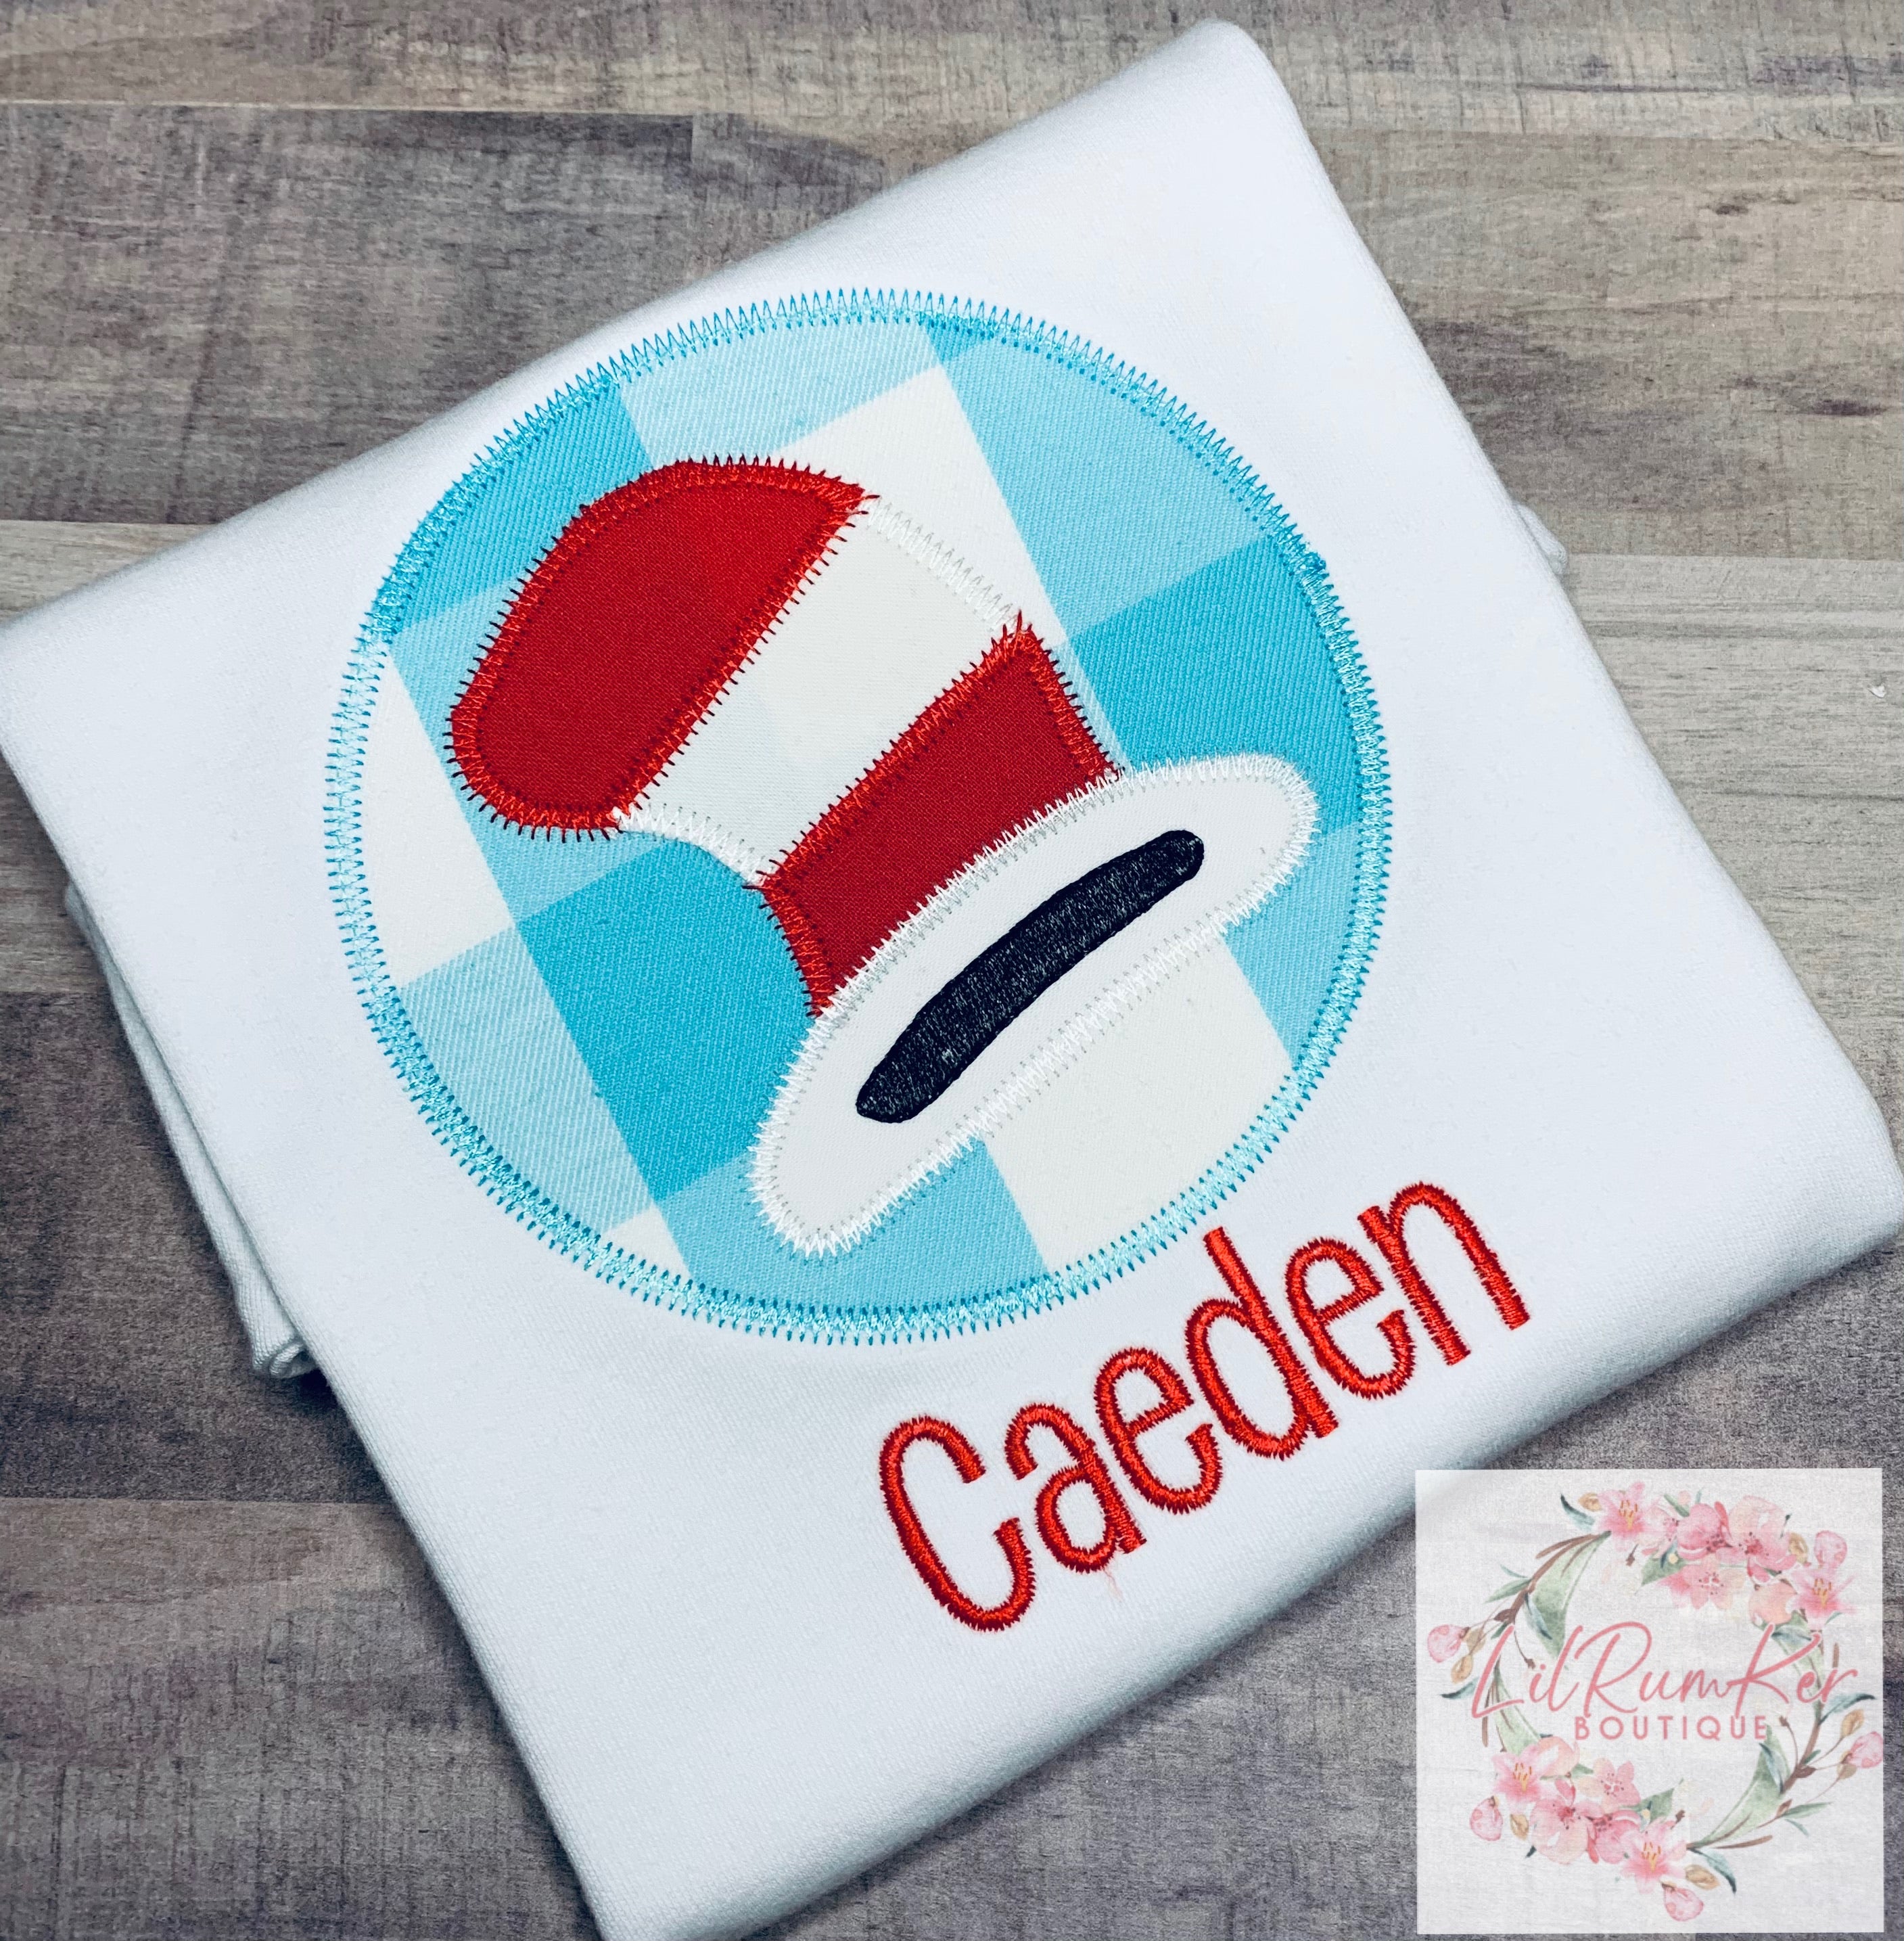 Cat in the hat inspired shirt